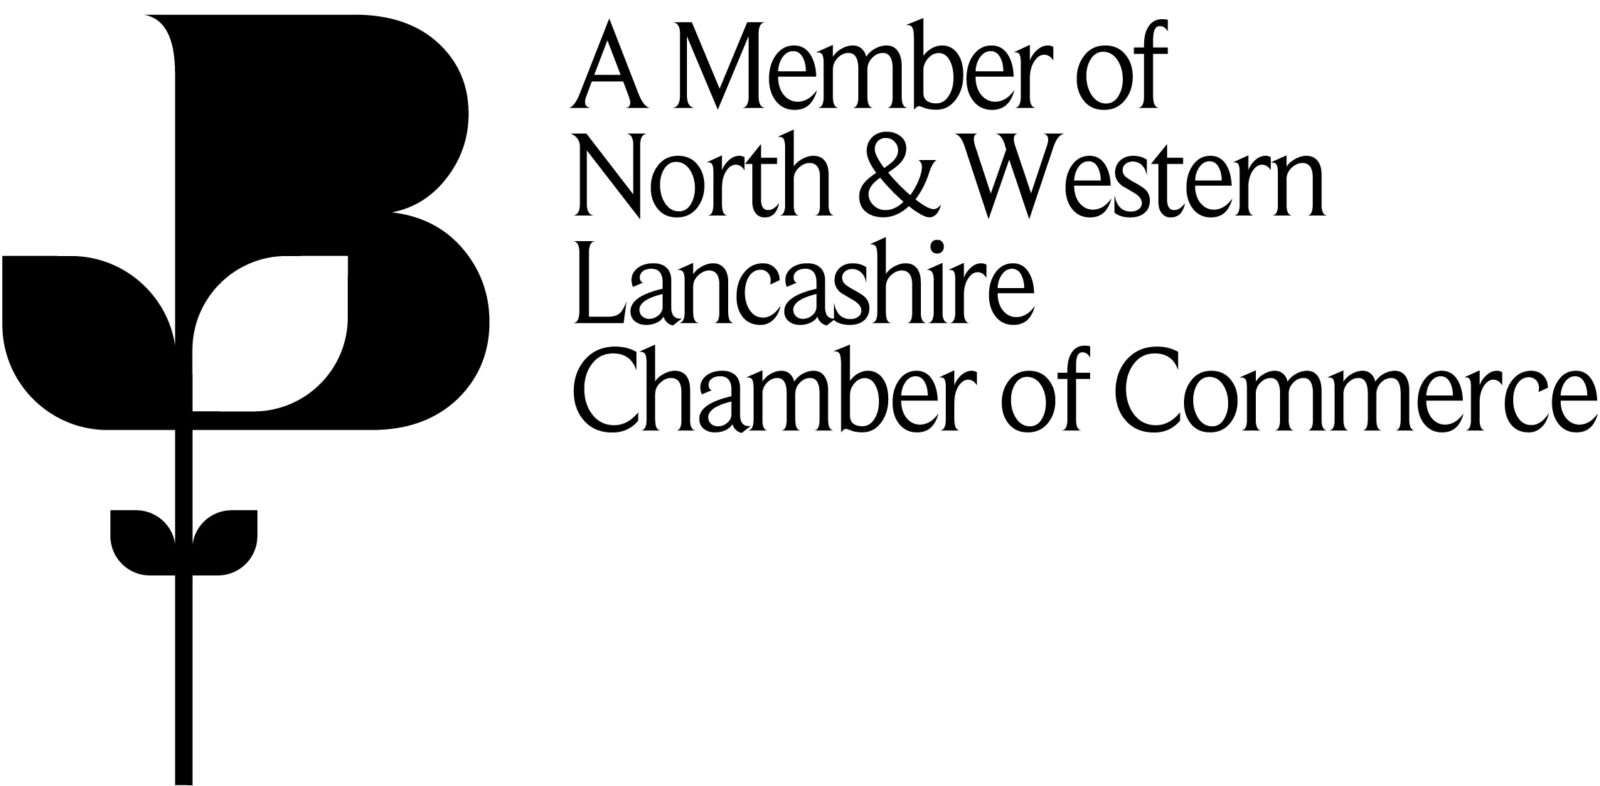 A Member of North & Western Lancashire Chamber of Commerce